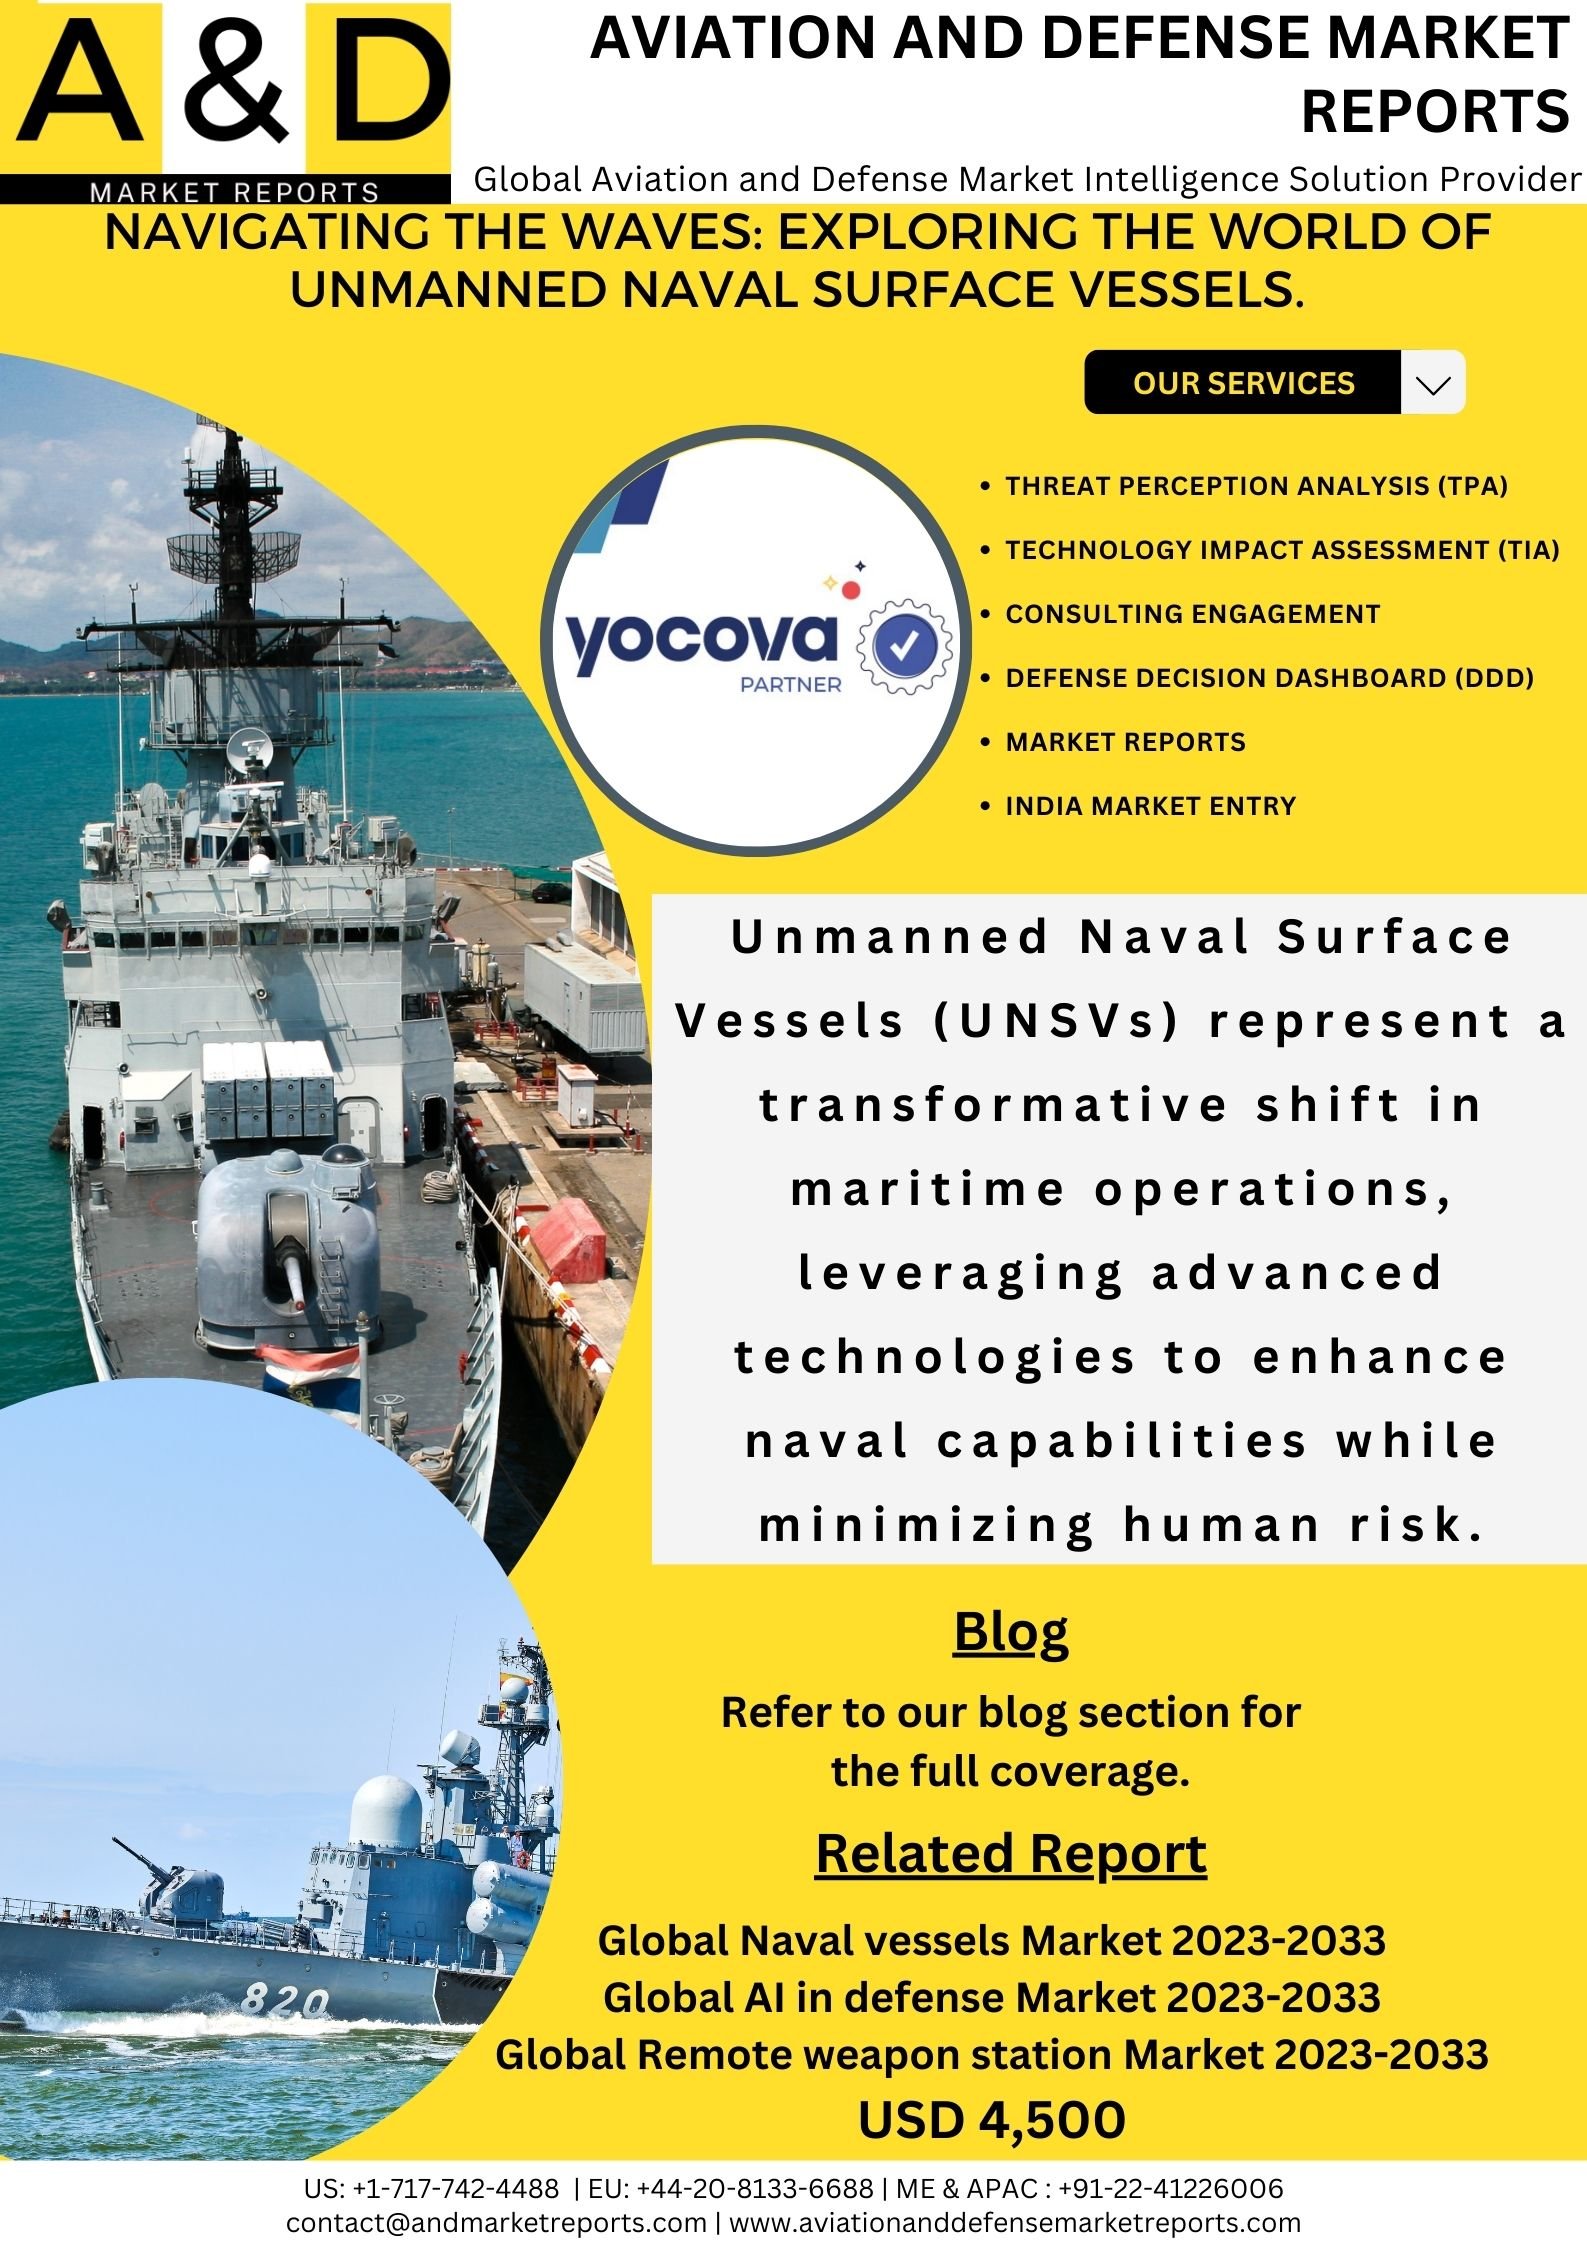 NAVIGATING THE WAVES: Exploring The World Of Unmanned Naval Surface Vessels